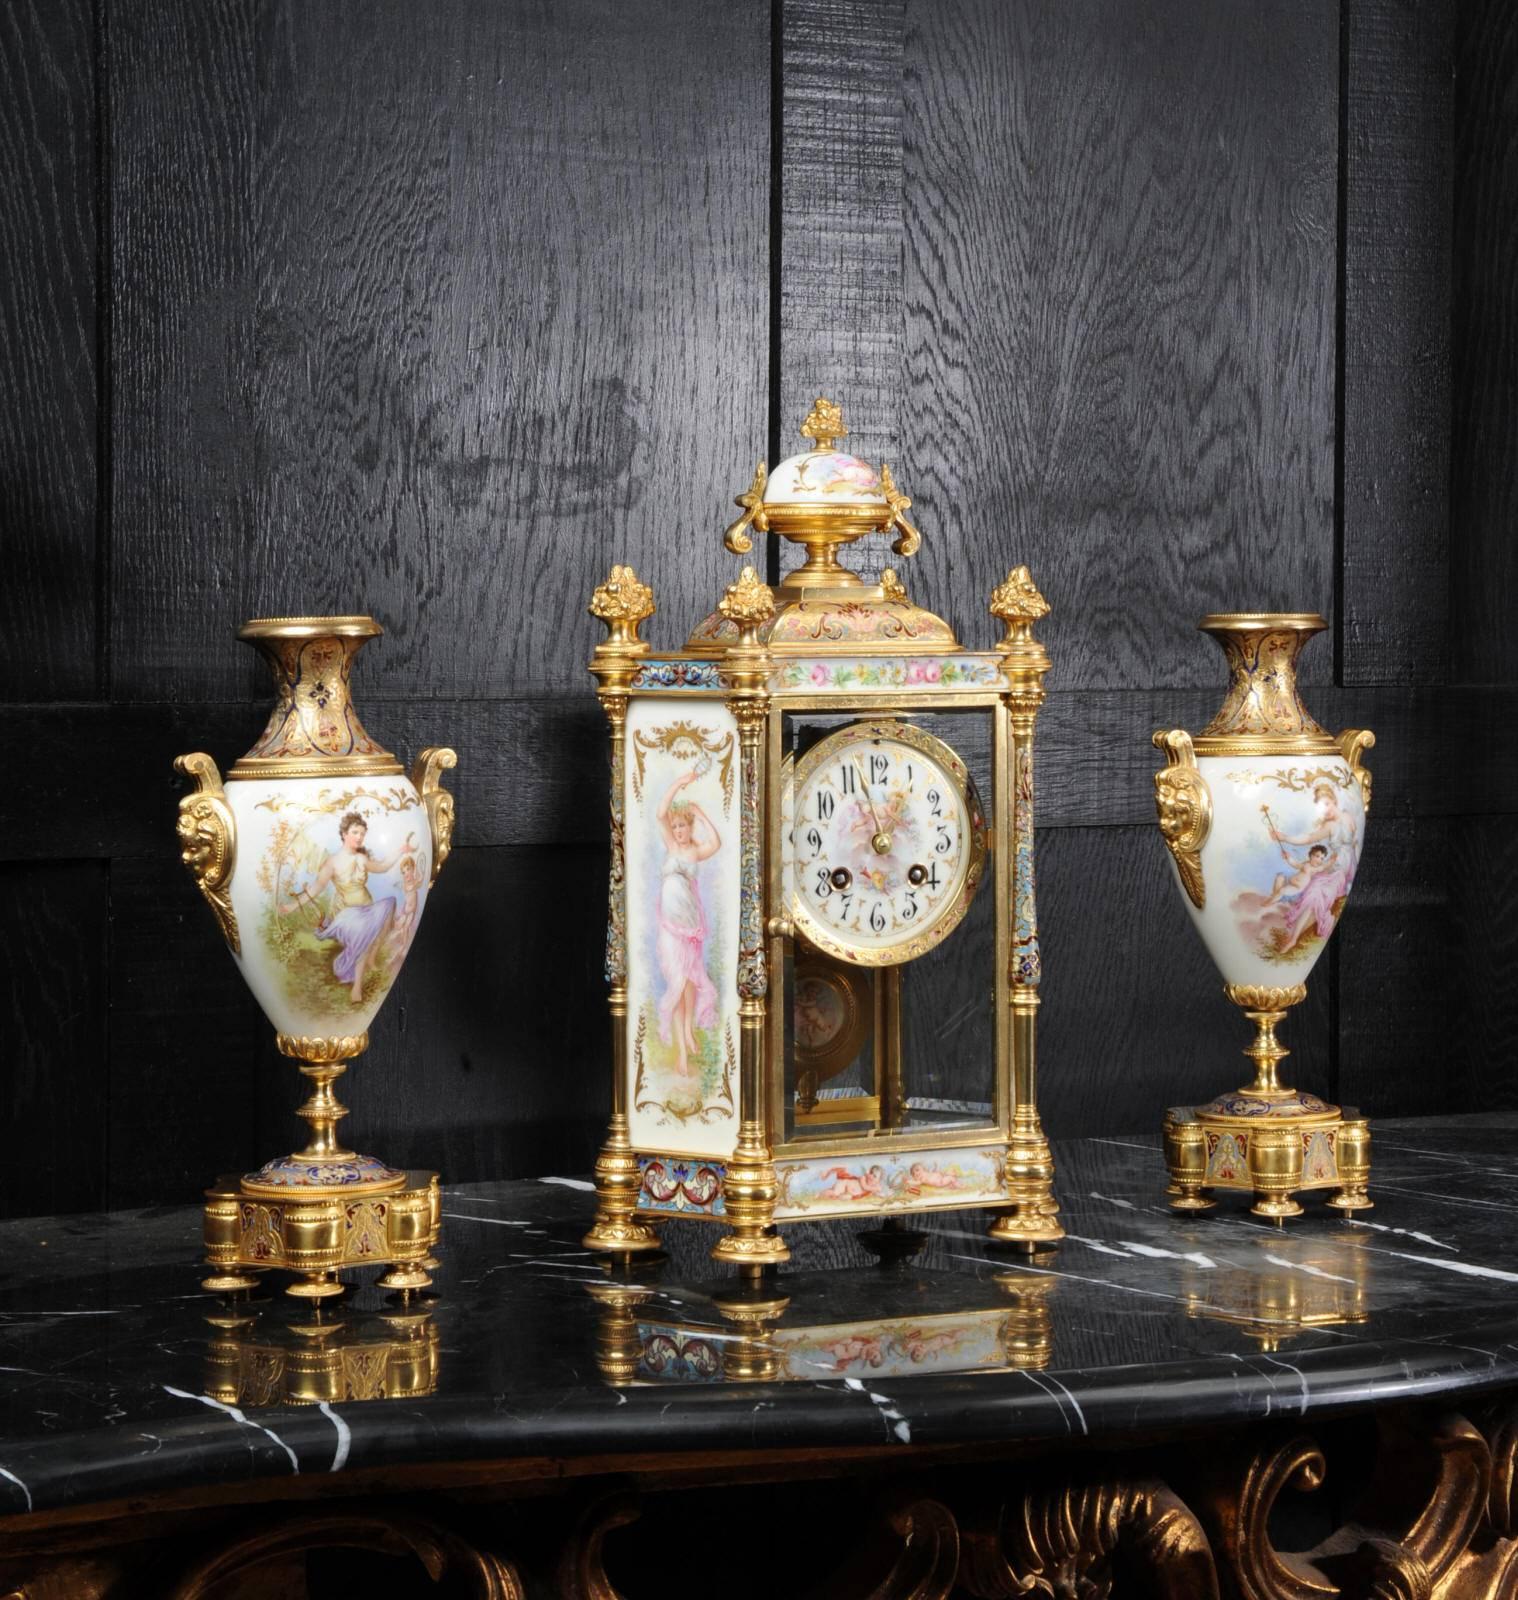 A rare and beautiful antique French clock garniture, in excellent original condition. Ormolu (fine gilded bronze) is mounted with exquisitely painted Sèvres style porcelain and inset with rich champlevé enamel. Porcelain is very finely painted with